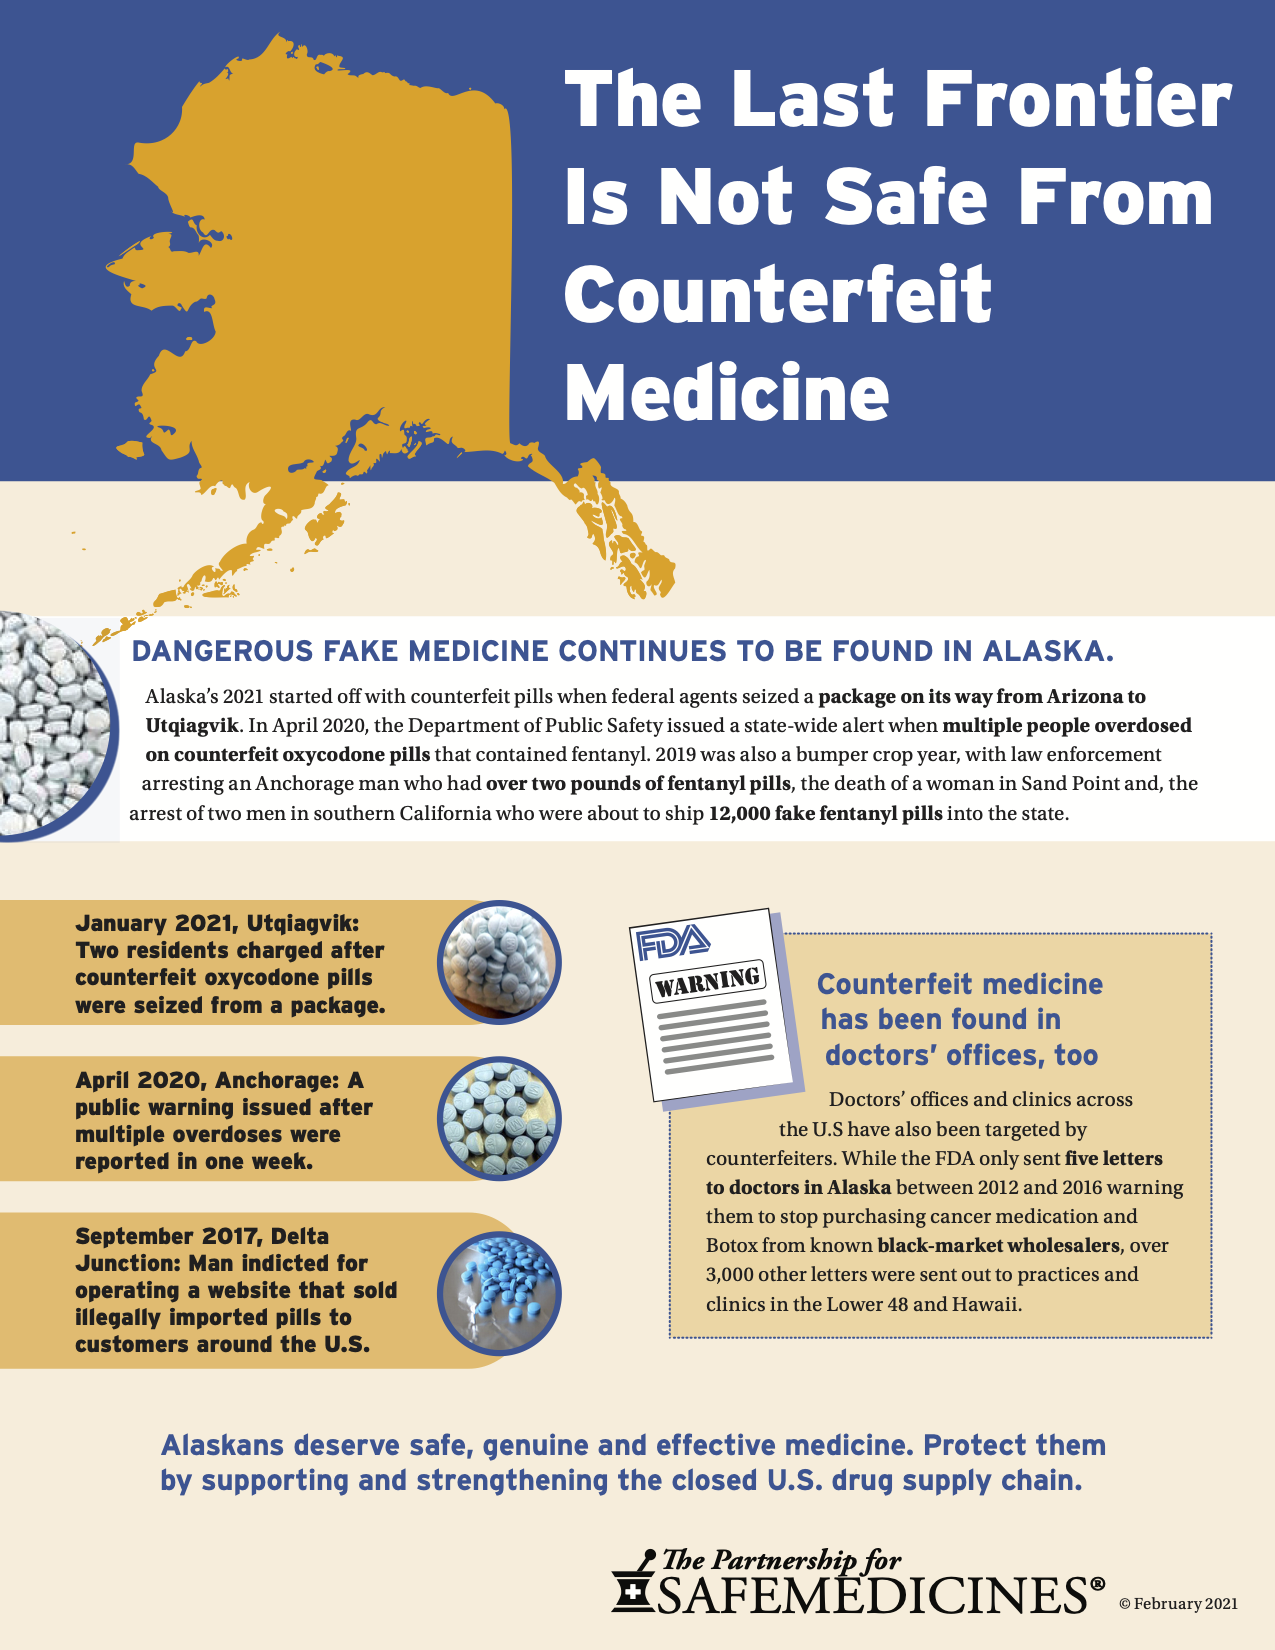 <a href="http://www.safemedicines.org/wp-content/uploads/2019/09/AK-2021-update-infosheet-SECURE.pdf">Download our January 2021 PDF</a>